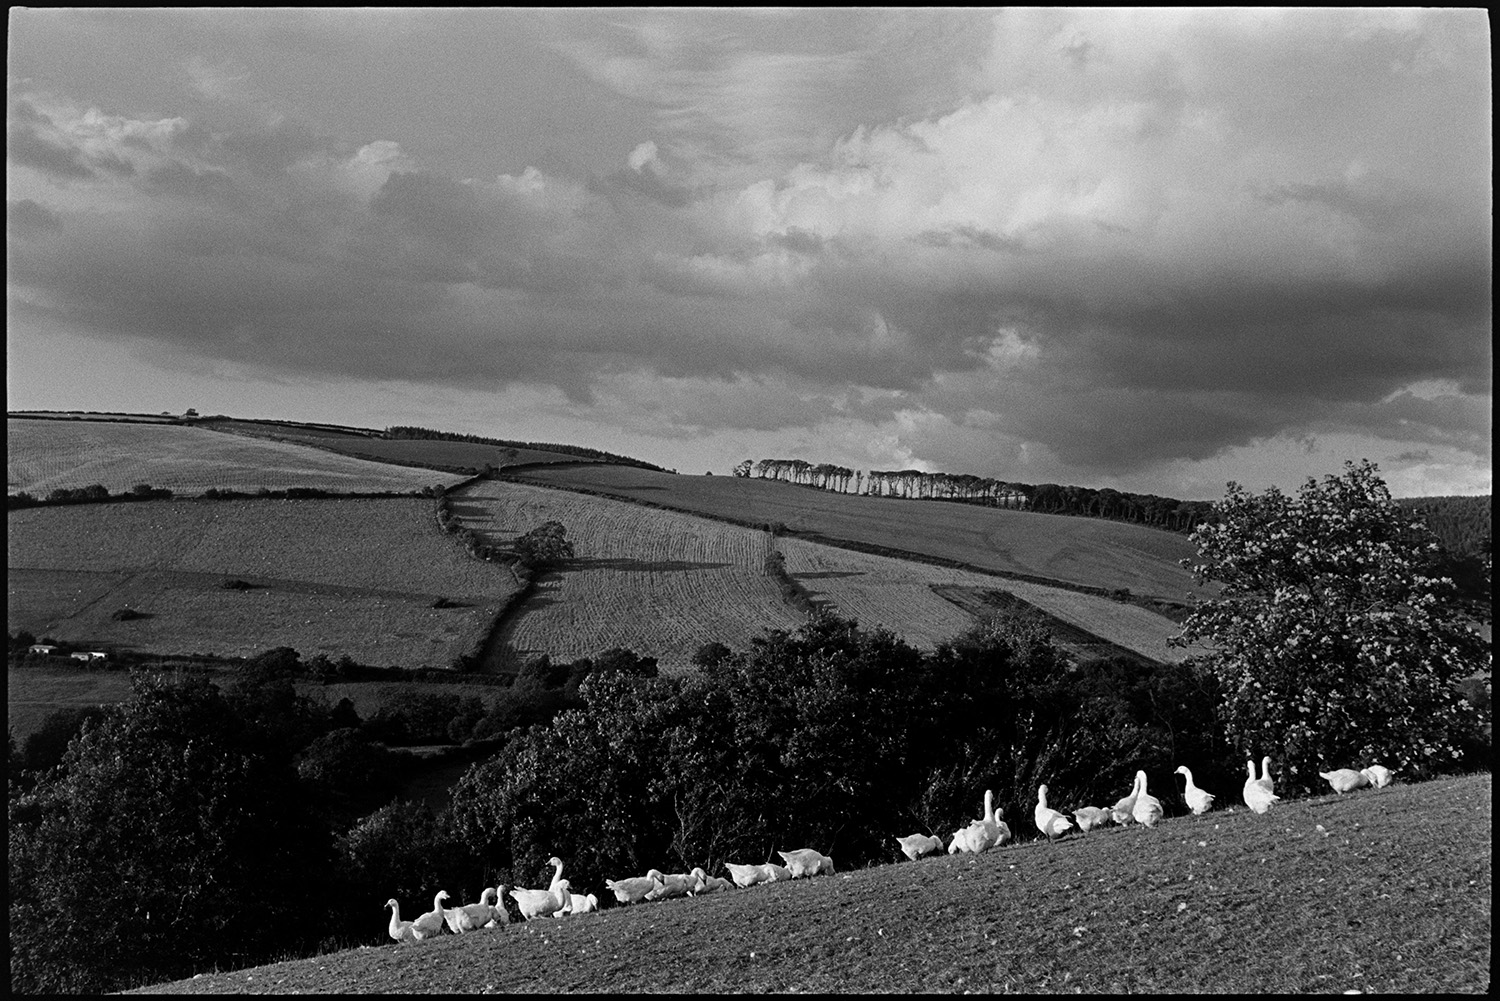 Geese under stormy sky, clouds and hills.<br />
[A gaggle of geese in a field at Indiwell, Swimbridge. Storm clouds are in the sky overhead and a wooded valley and fields are visible in the background. The geese were a breeding flock which lived on the hill between 1980- 1992, after which they moved to Milborne Port, Dorset where they could often be seen grazing in the fields below the deer park of Sherborne Castle. The eggs were collected for hatching on the farm and goslings were sent out to homes all over the UK. Infertile eggs would sometimes be used by artists for egg decorating.]